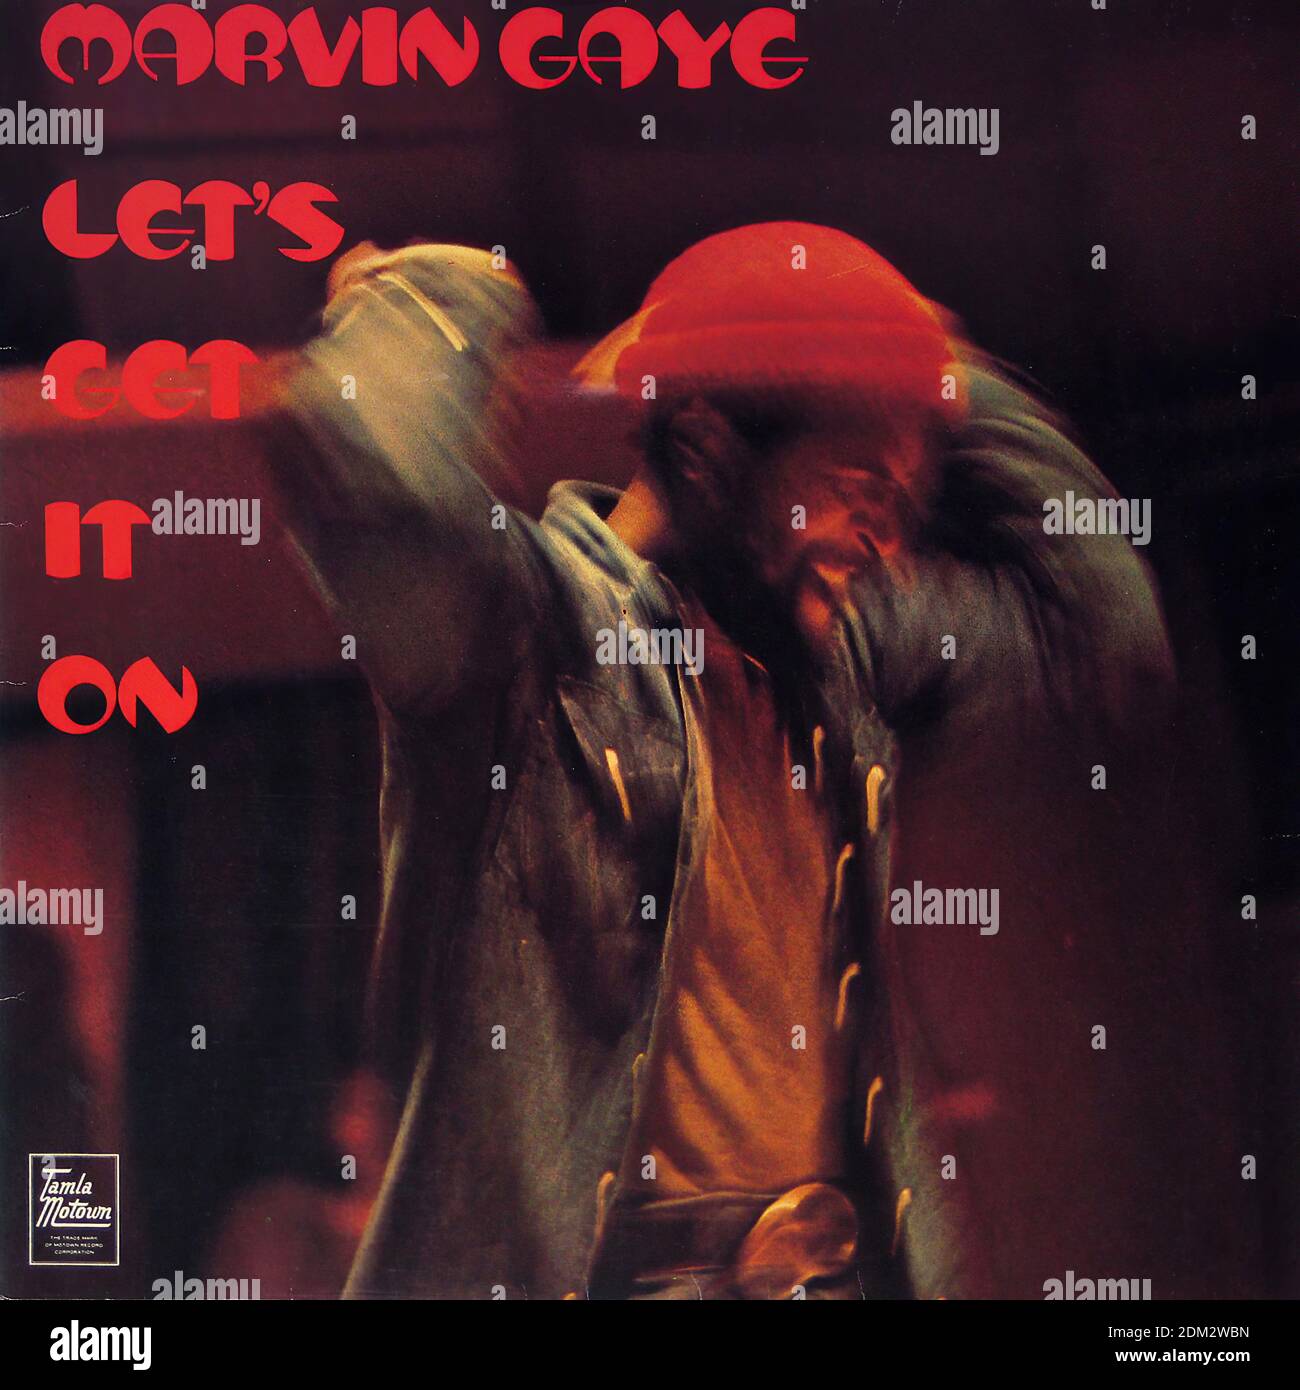 marvin gaye 10 - Vintage Vinyl Record Cover Stock Photo